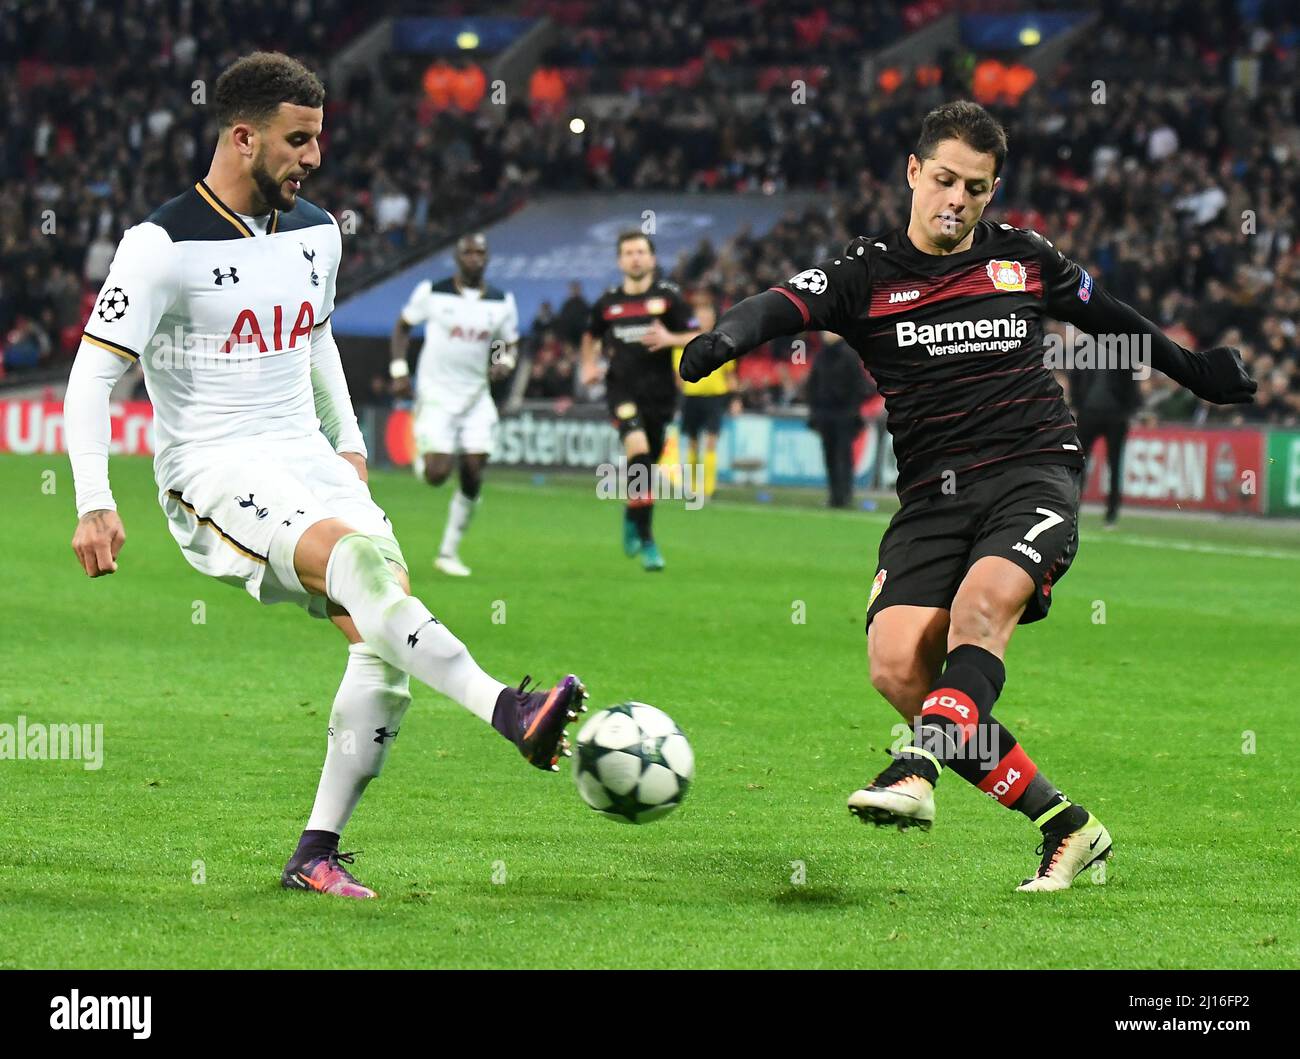 LONDON, ENGLAND - NOVEMBER 2, 2016: Kyle Walker (L) of Tottenham and Javier Hernandez (R) of Leverkusen pictured in action during the UEFA Champions League Group E game between Tottenham Hotspur and Bayern Leverkusen at Wembley Stadium. Copyright: Cosmin Iftode/Picstaff Stock Photo